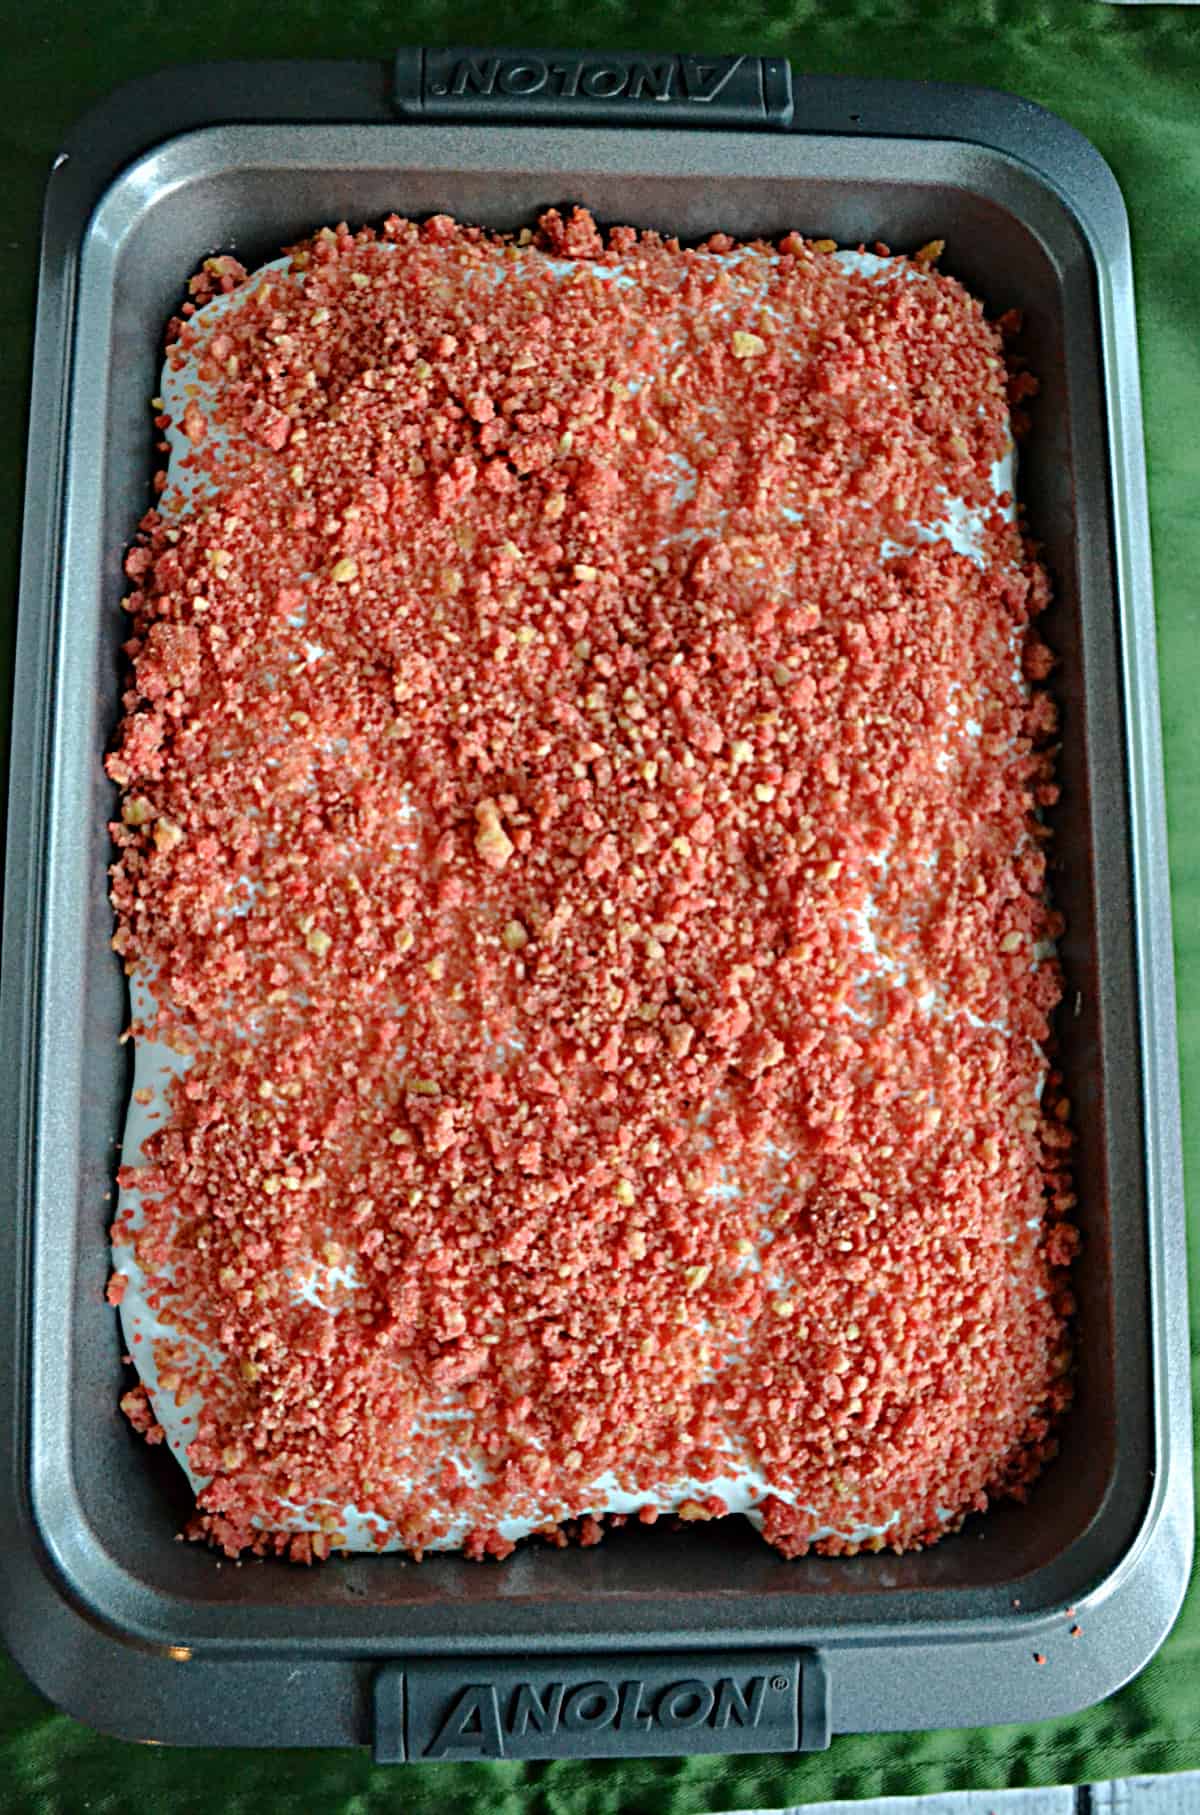 A cake with whipped frosting and pink strawberry scooter crunch topping.